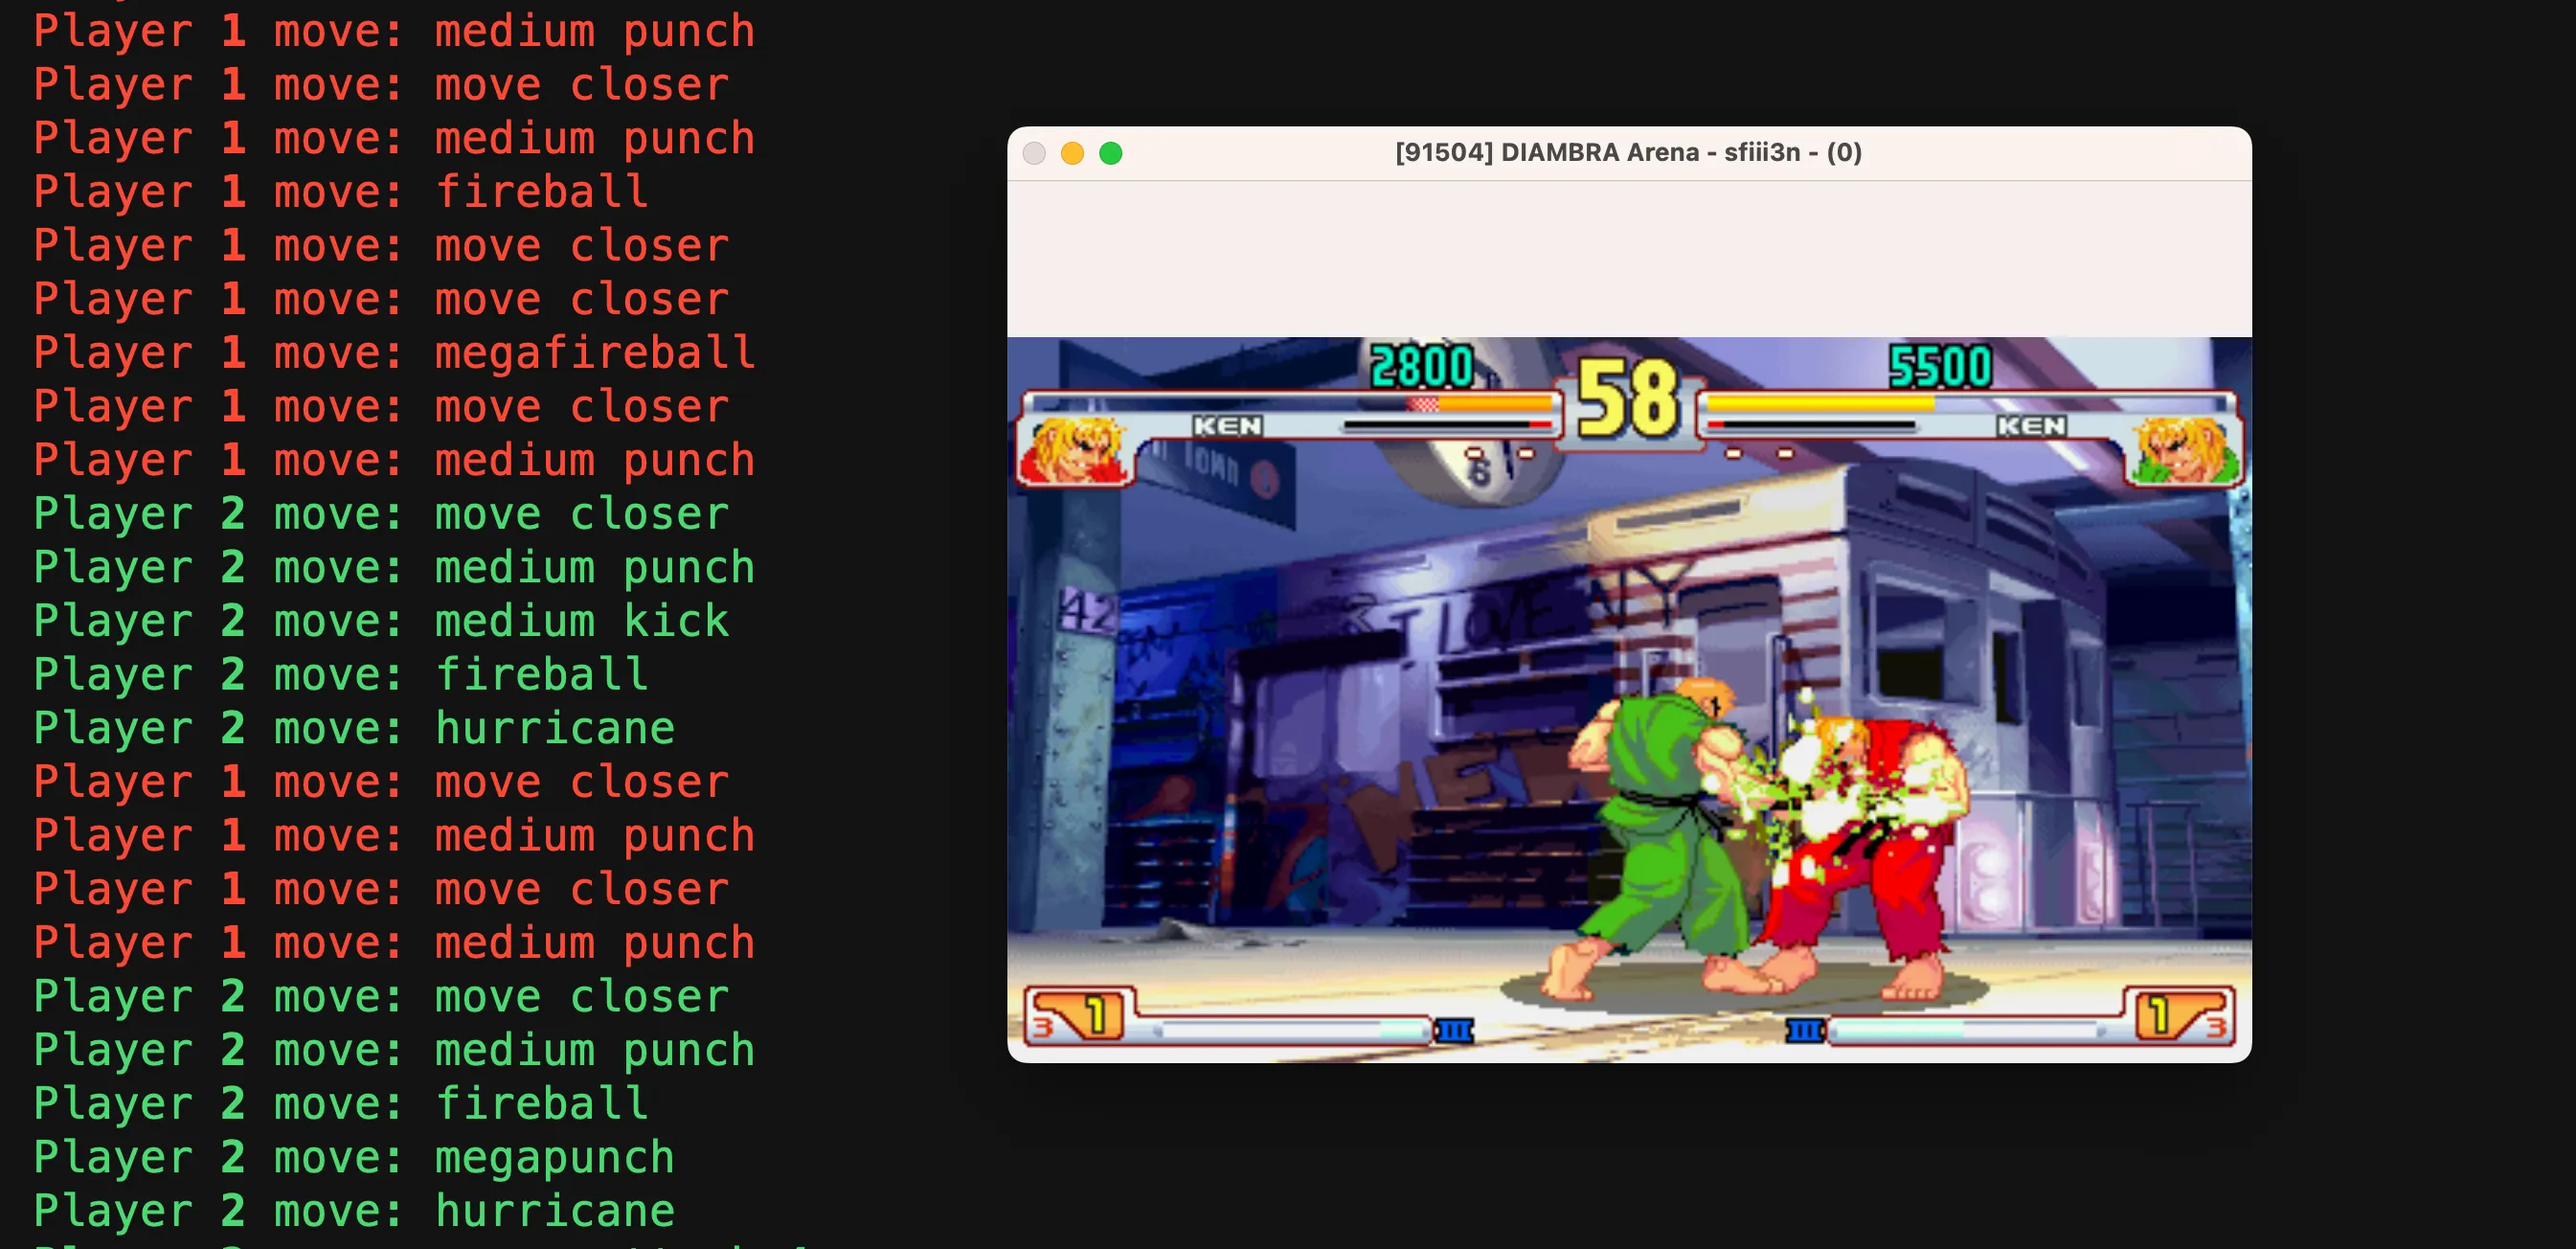 14 LLMs fought 314 Street Fighter matches. Here's who won